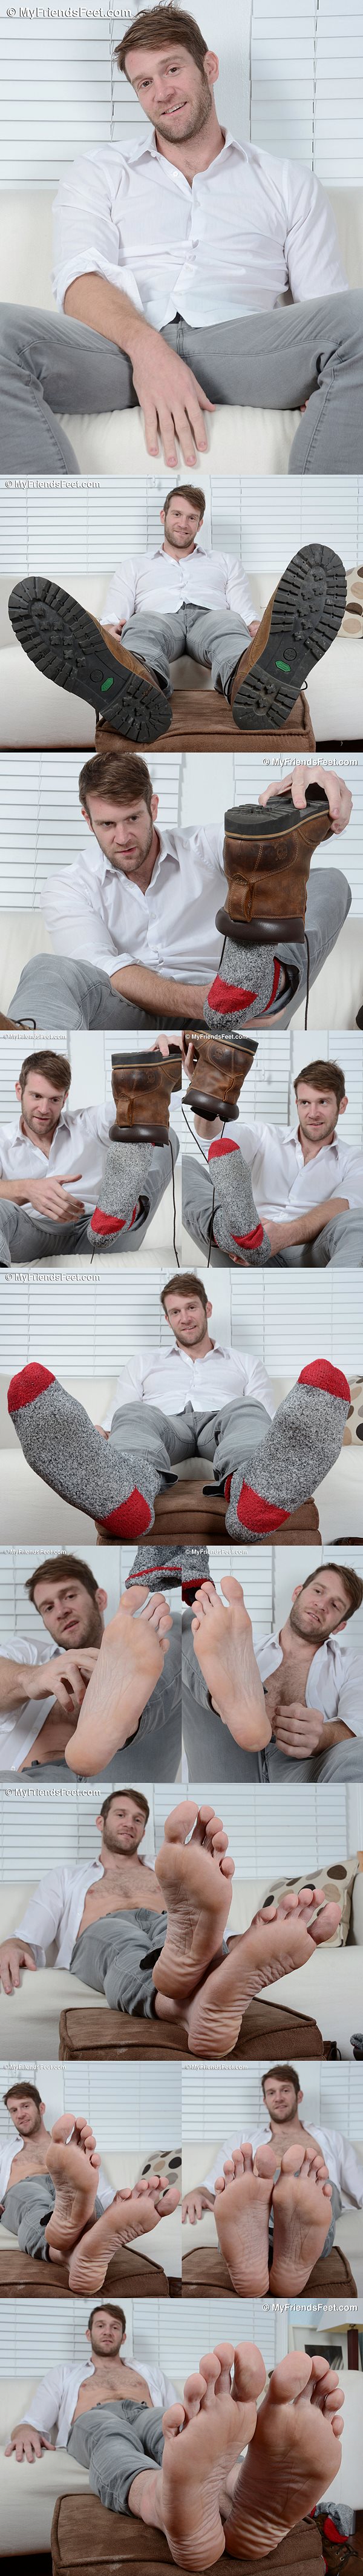 Colby Keller shows off his size 15 feet in wool socks and bare at Myfriendsfeet